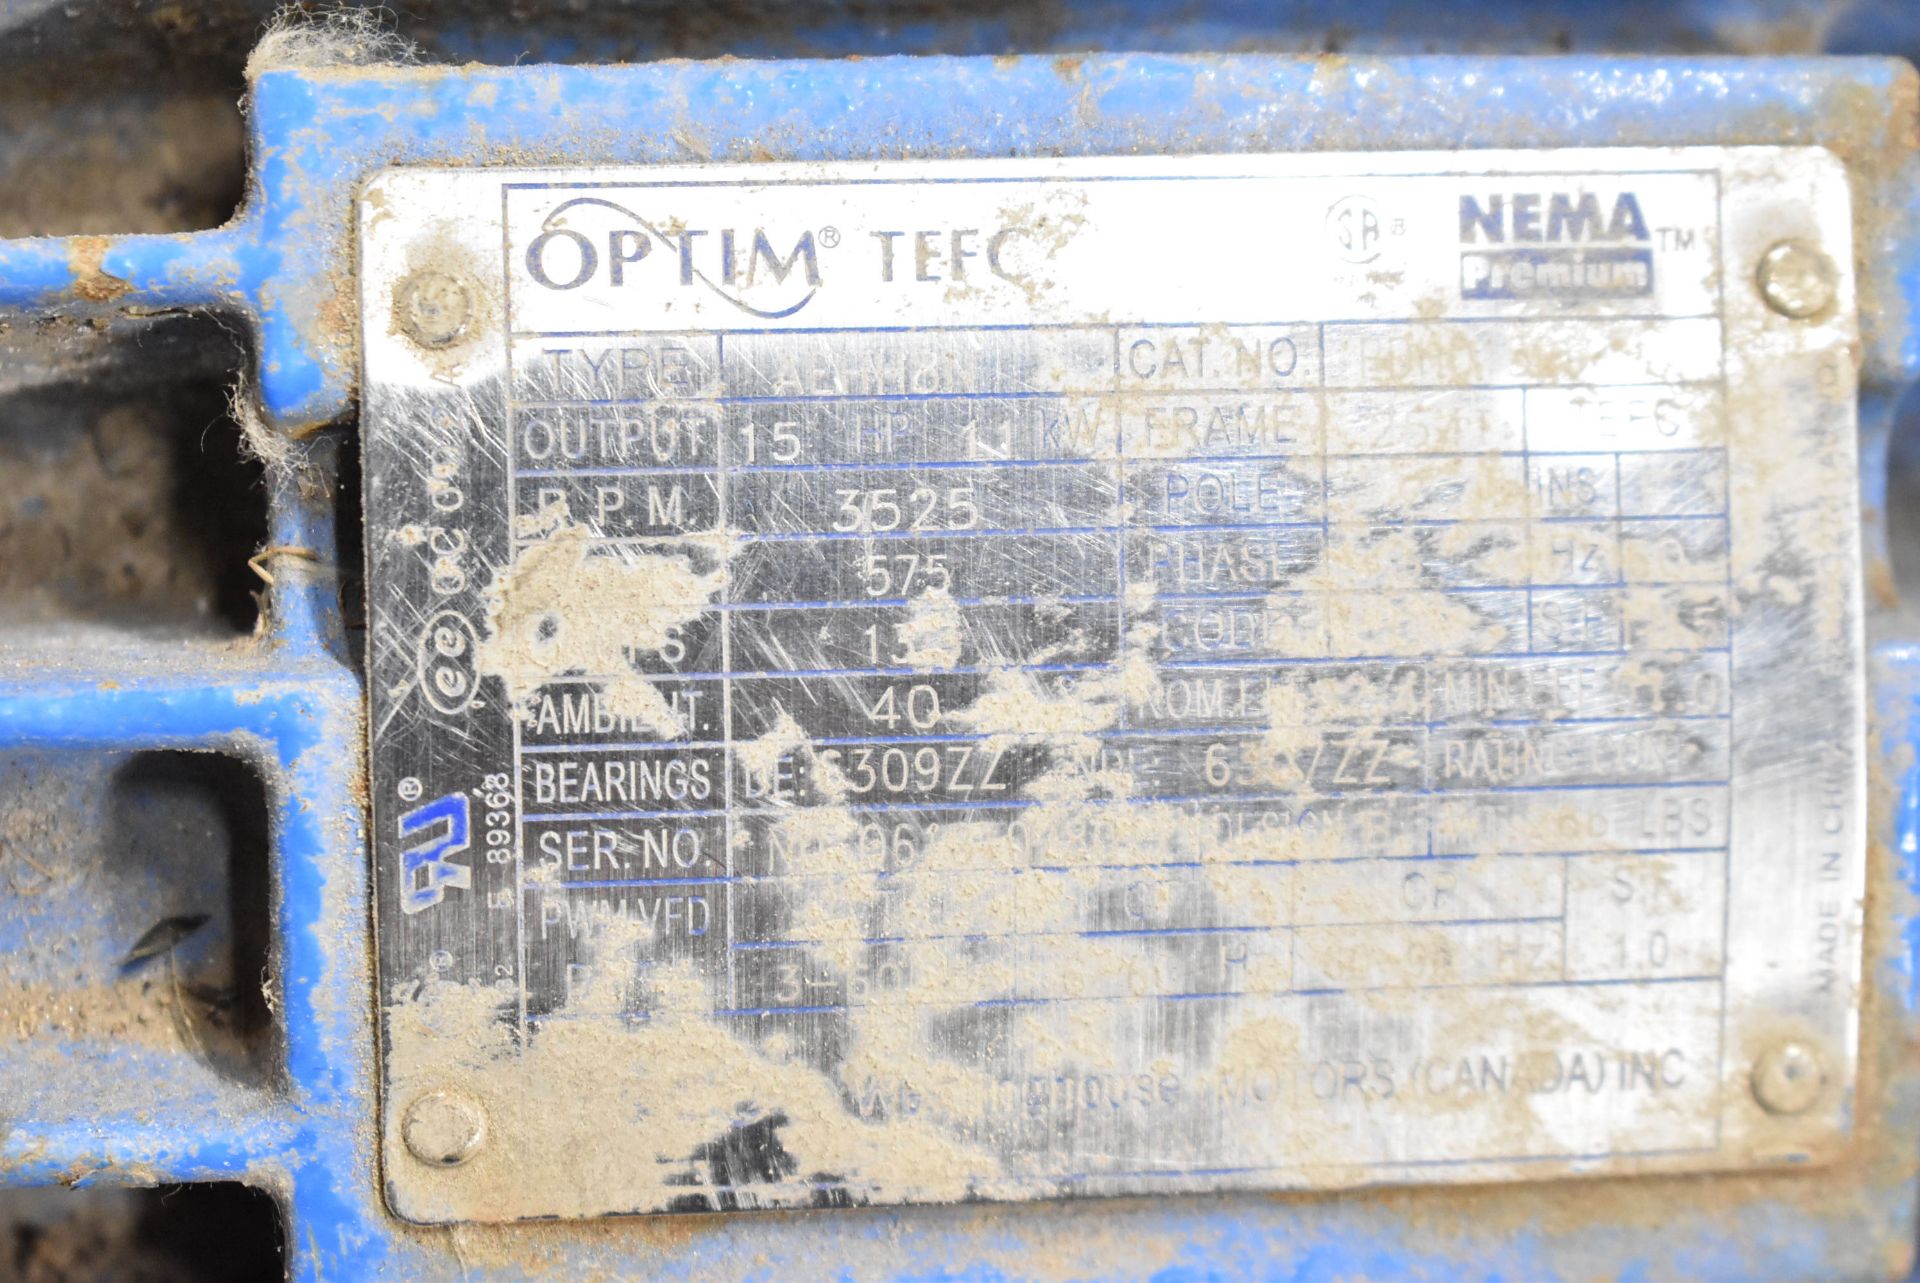 OPTIM TEFC 15HP, 3525RPM MOTOR AND EAGLE A100-S PUMP 3X2-6C SIZE 150 USGPM CAPACITY, 150FT 65PSI, - Image 3 of 4